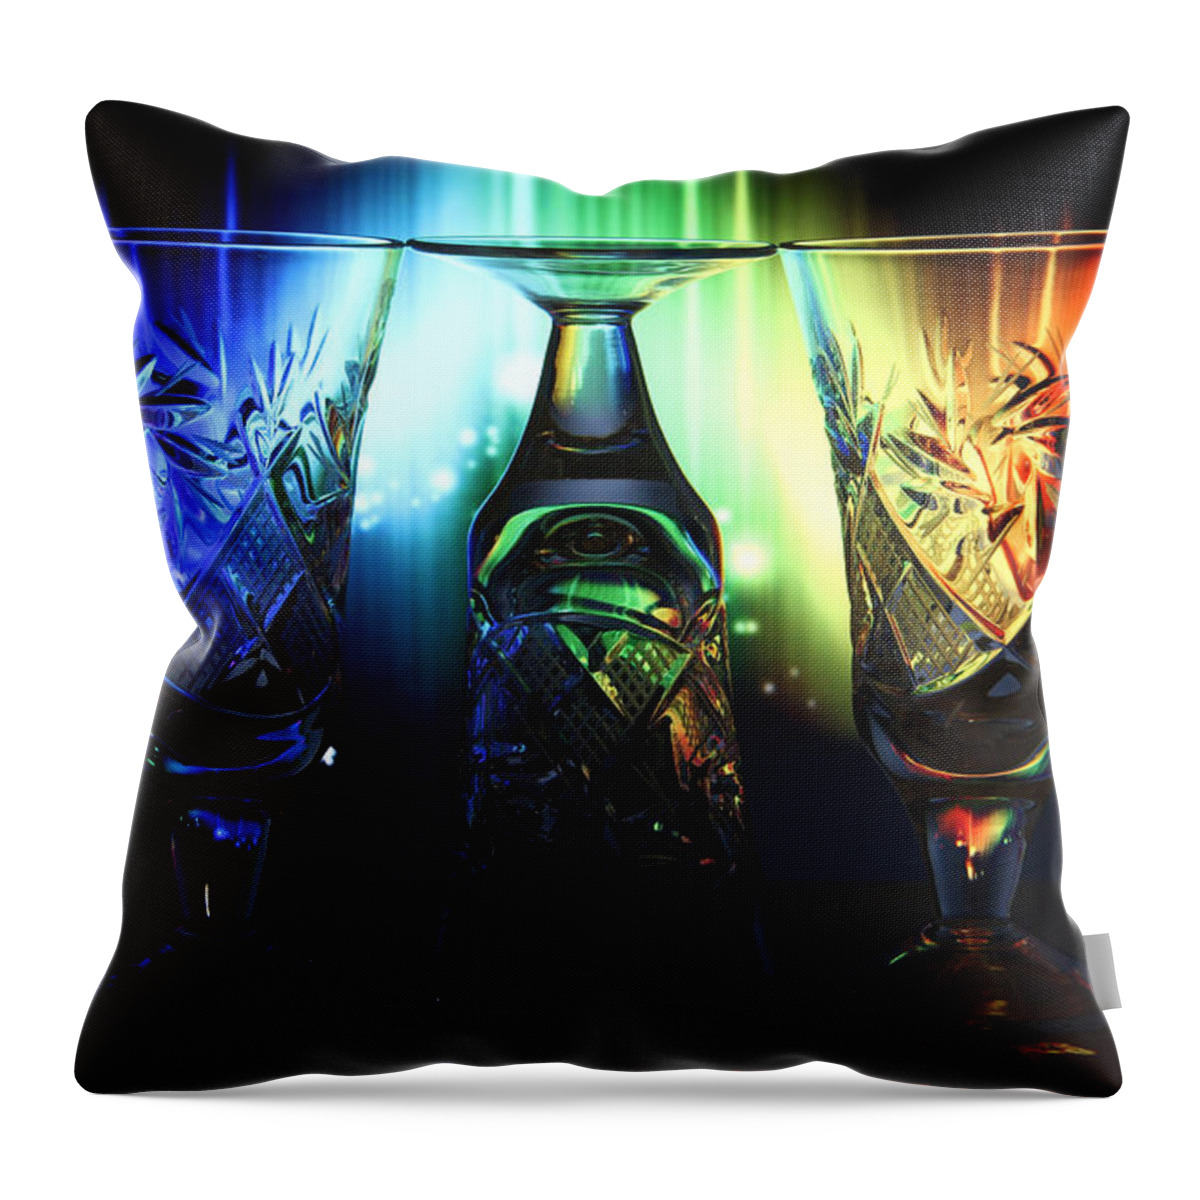 Glass Throw Pillow featuring the photograph Play of Glass and Colors by Natalia Otrakovskaya